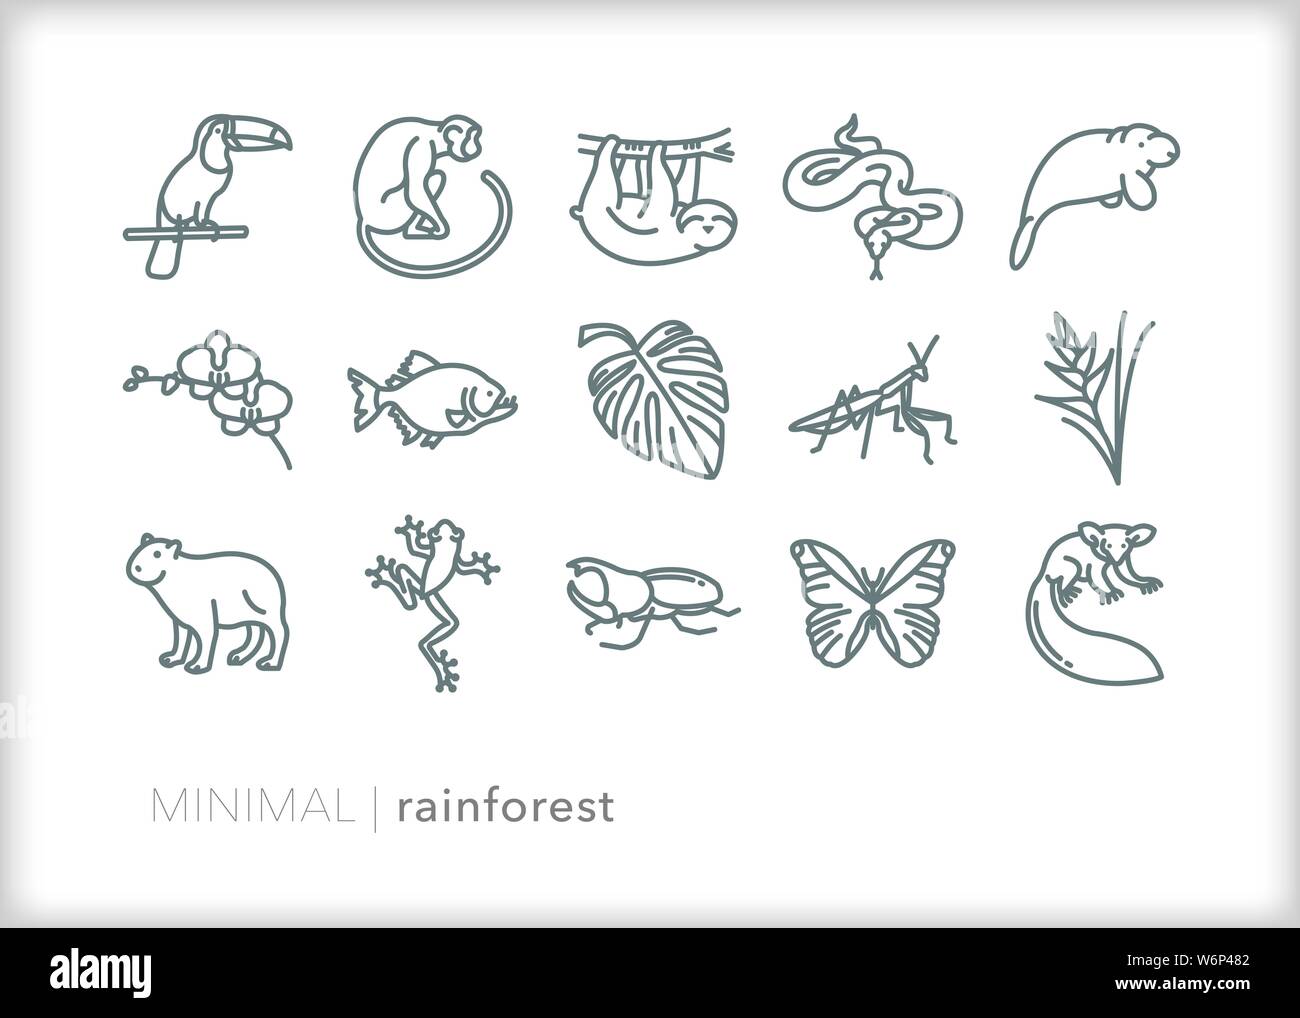 Set of 15 rain forest animal, bug and plant icons Stock Vector